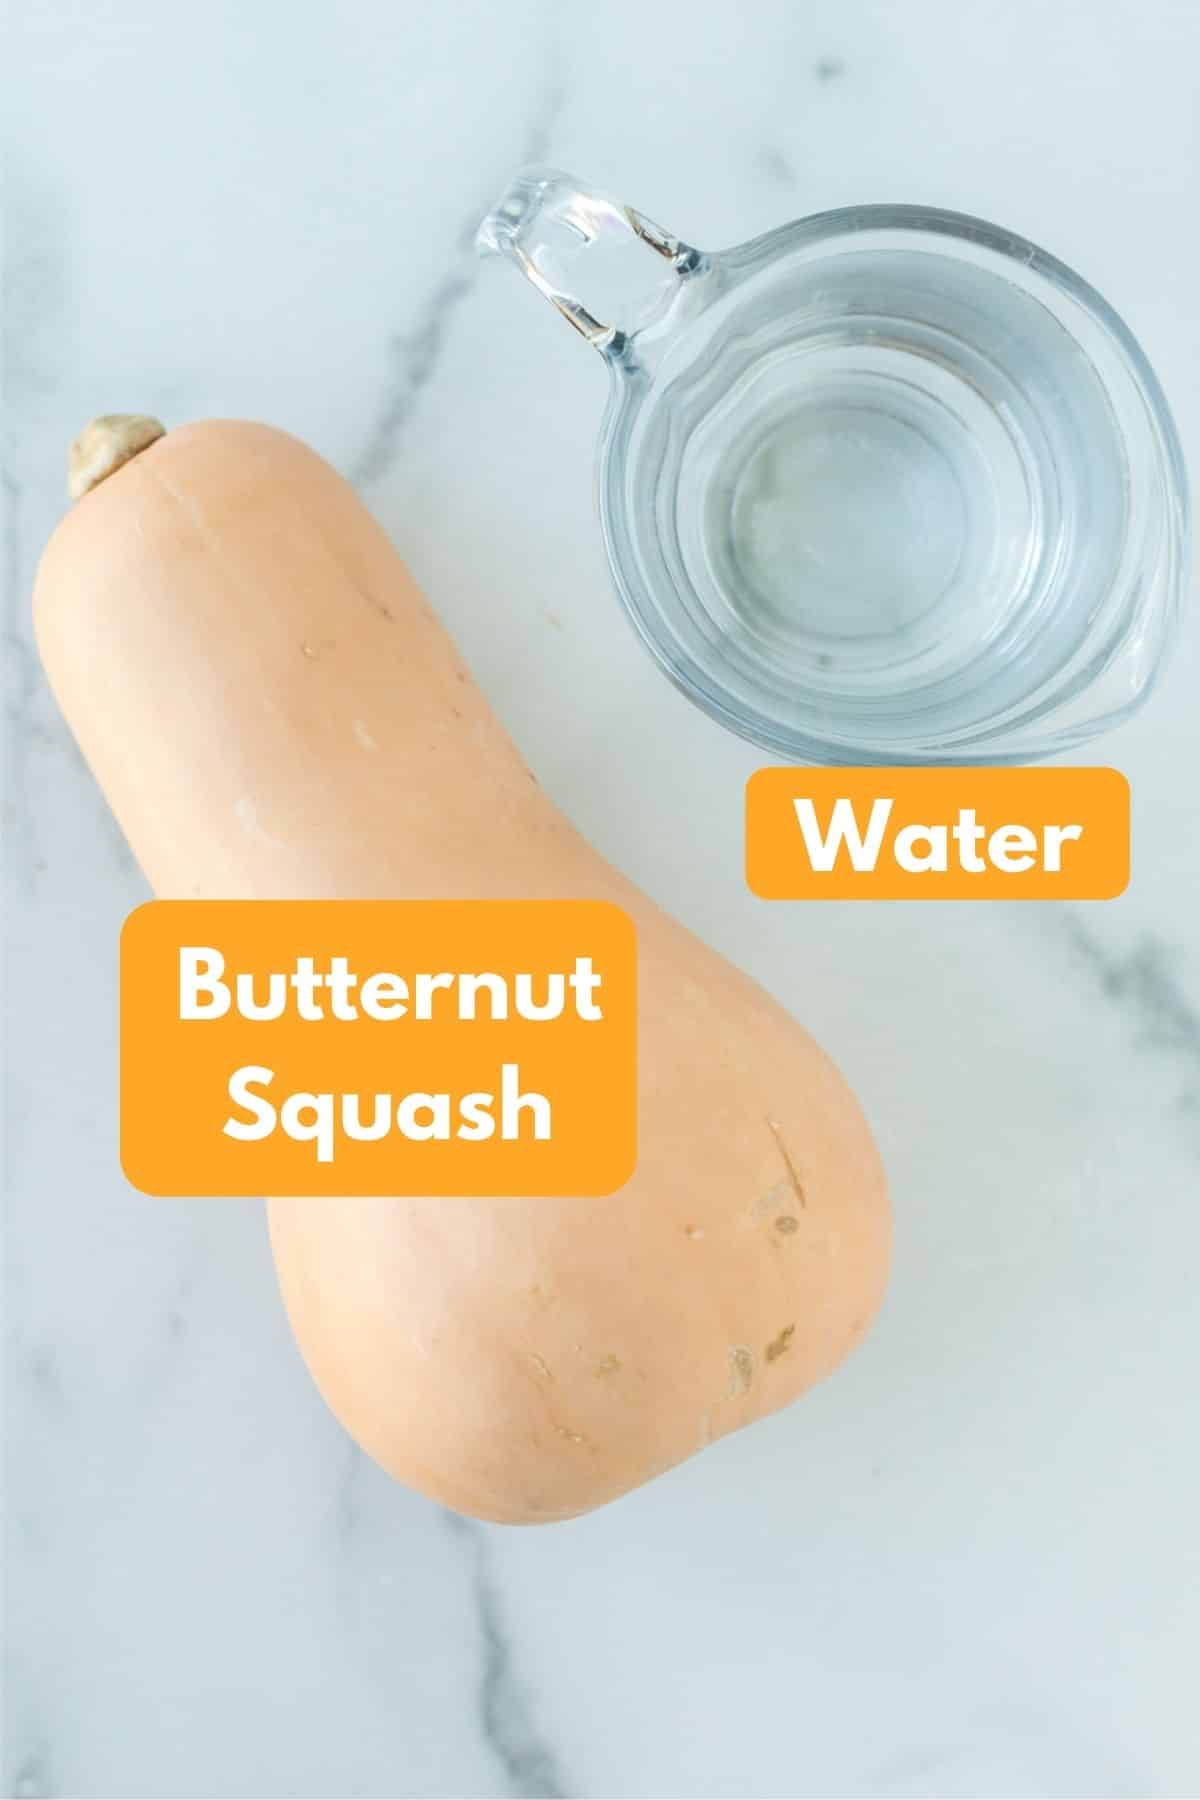 butternut squash and water to make instant pot dish.